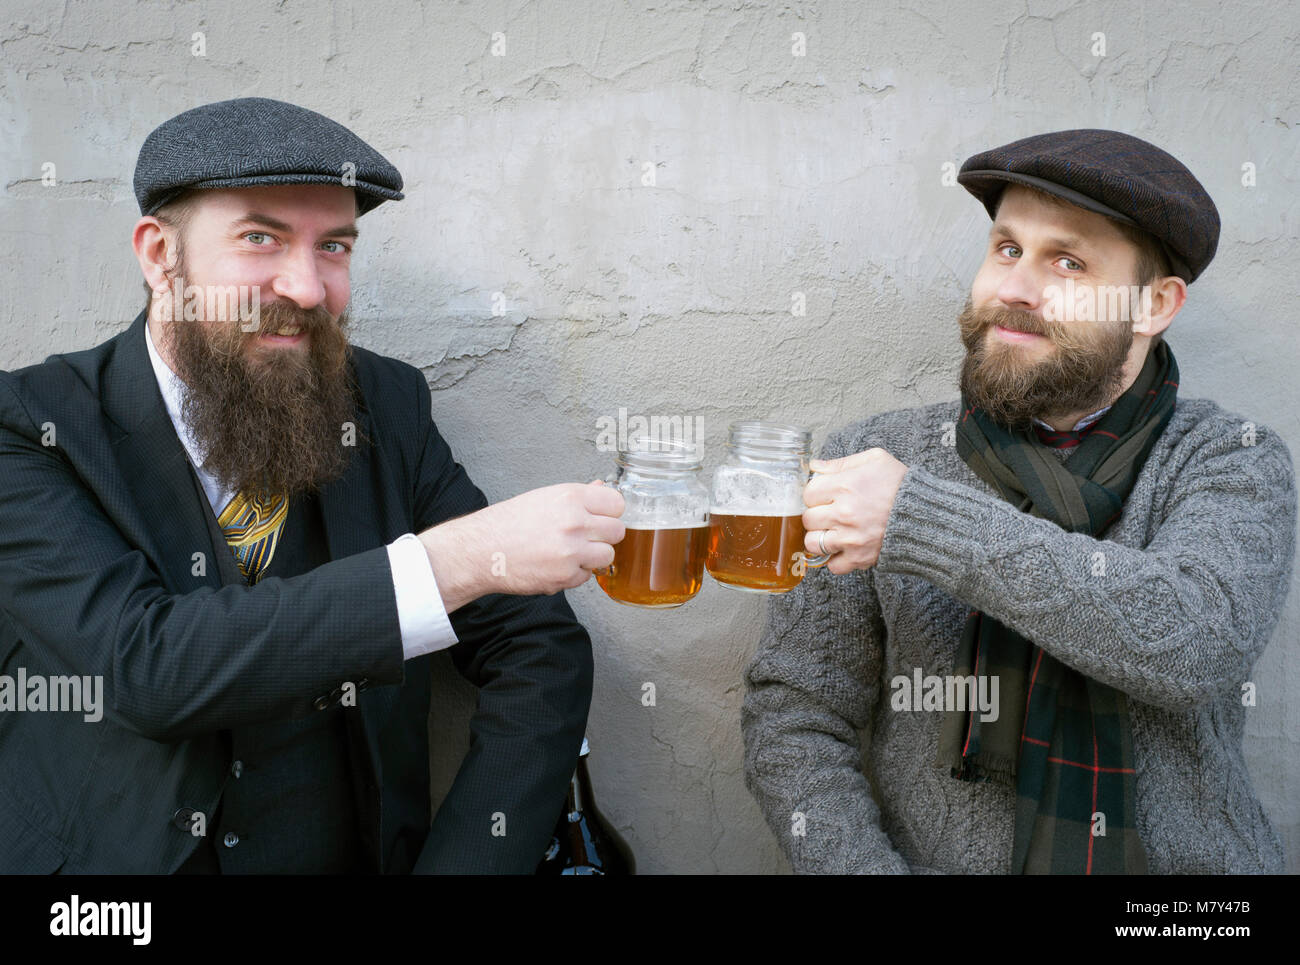 Two men with beards, drinking beer. Stock Photo